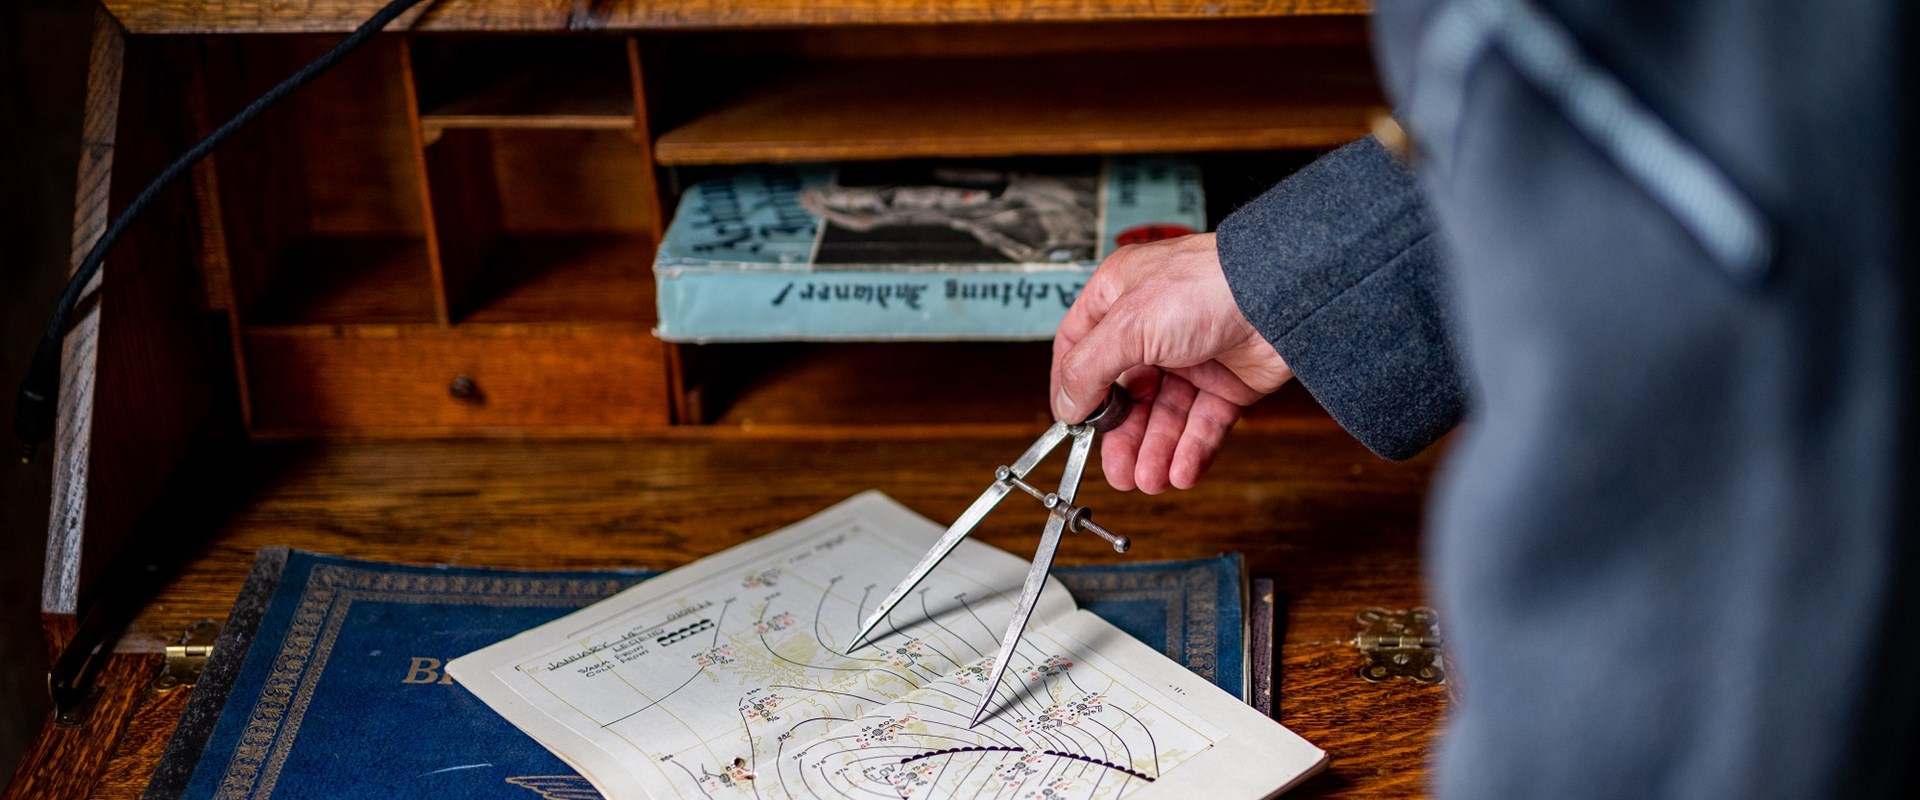 Someone is using a compass on a 1940s map. The map is placed on a desk, and the hand using the compass is visible as the person stands just out of shot, though they are wearing a blue RAF uniform.